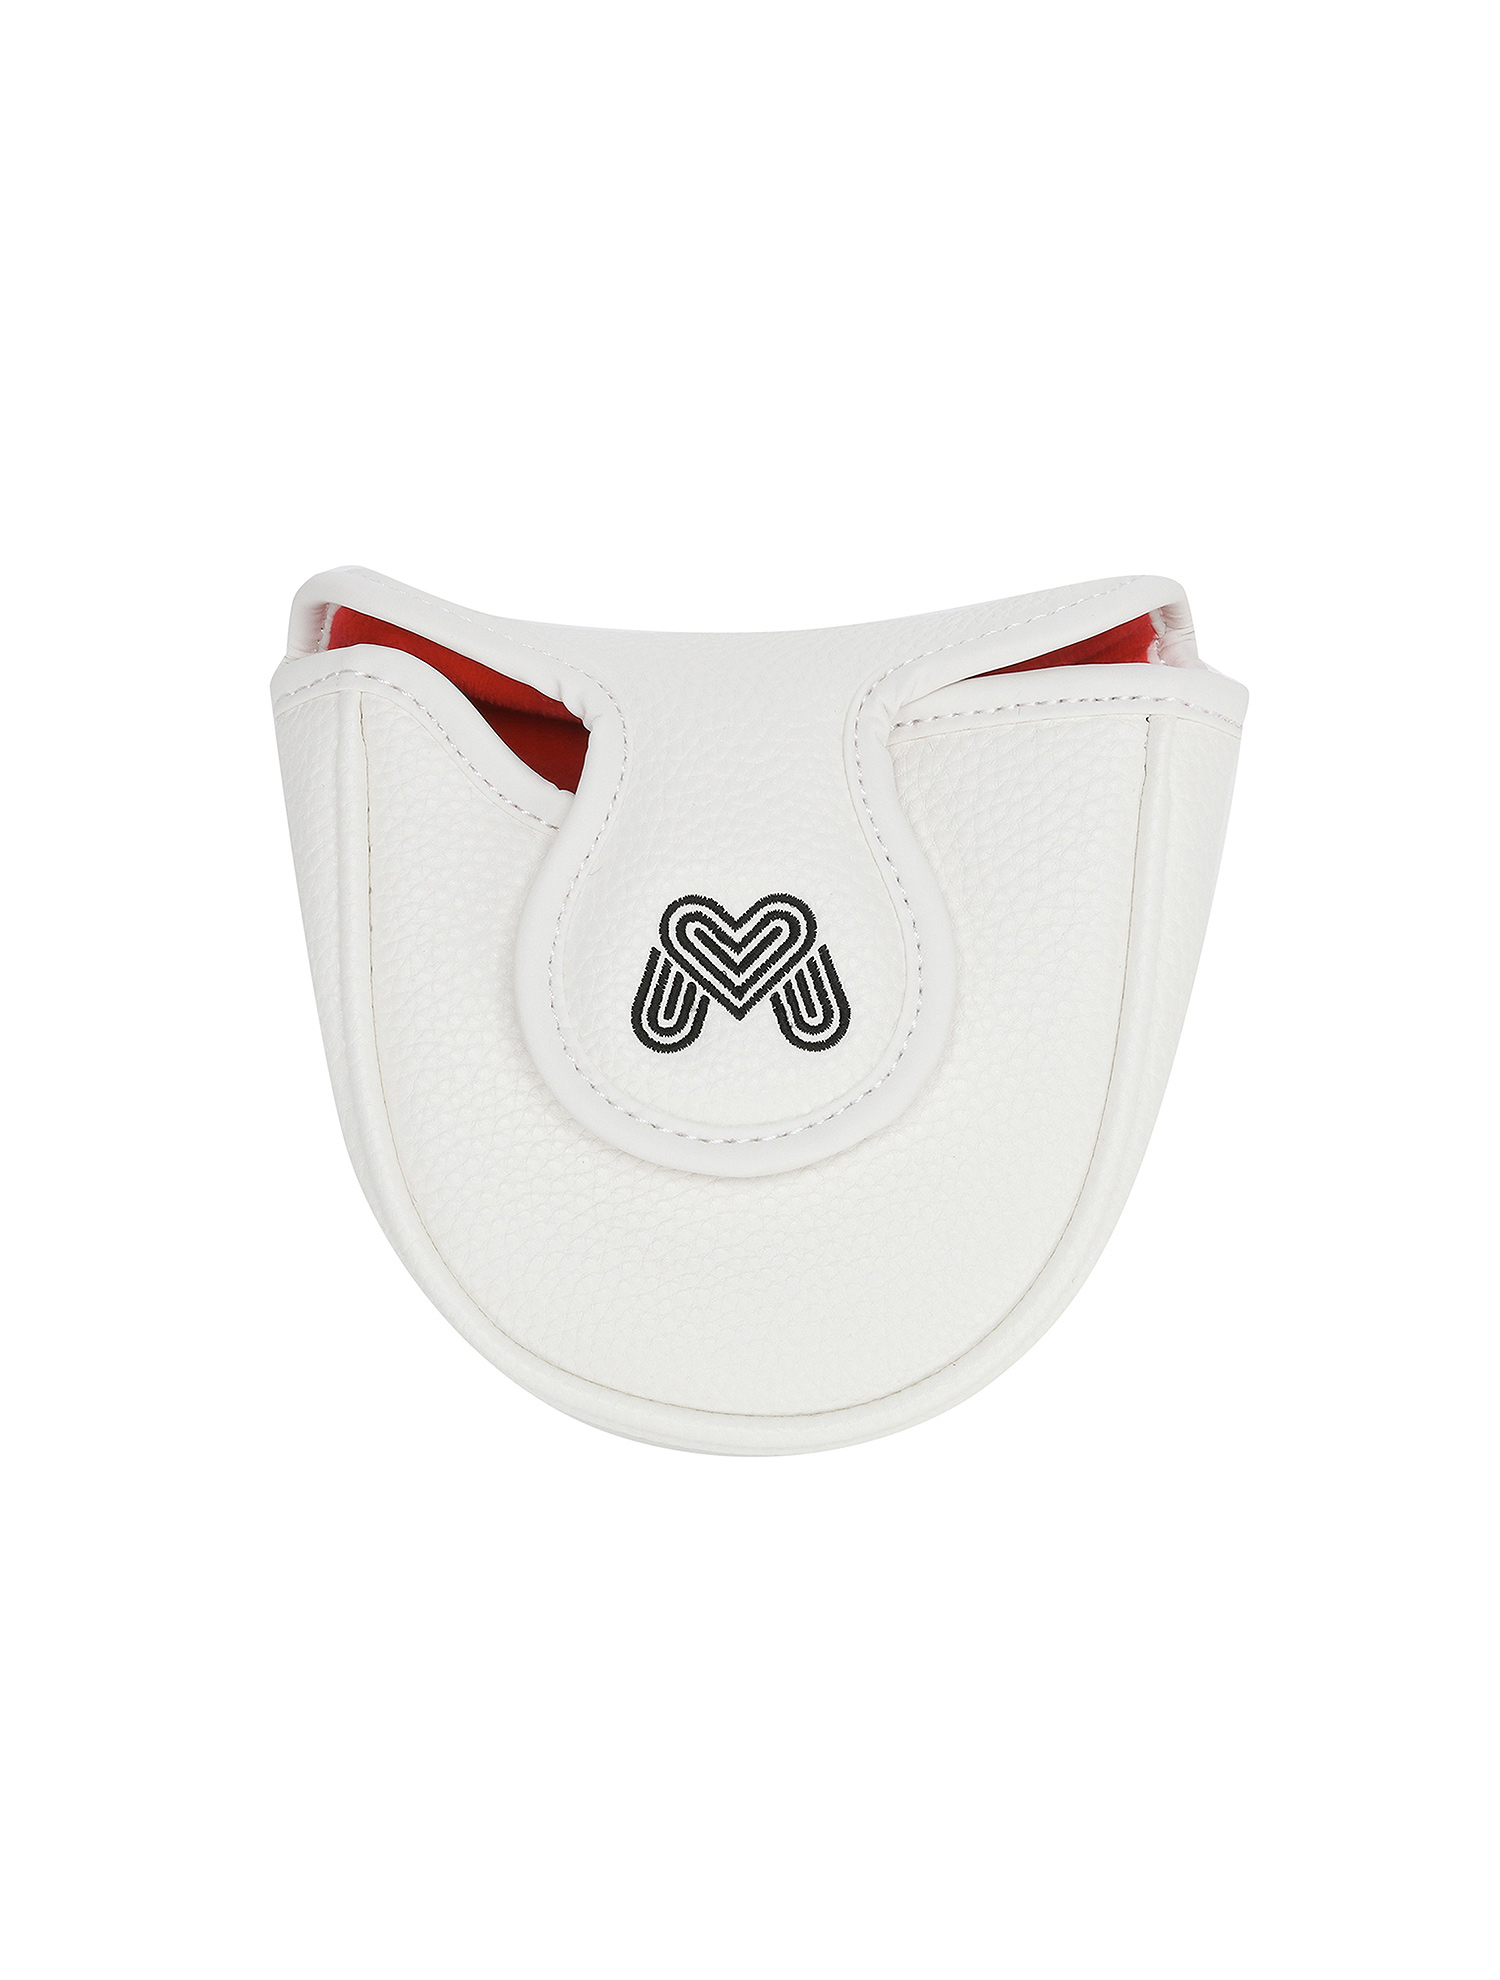 Martiny Putter Cover_White (QWAEAA00231)